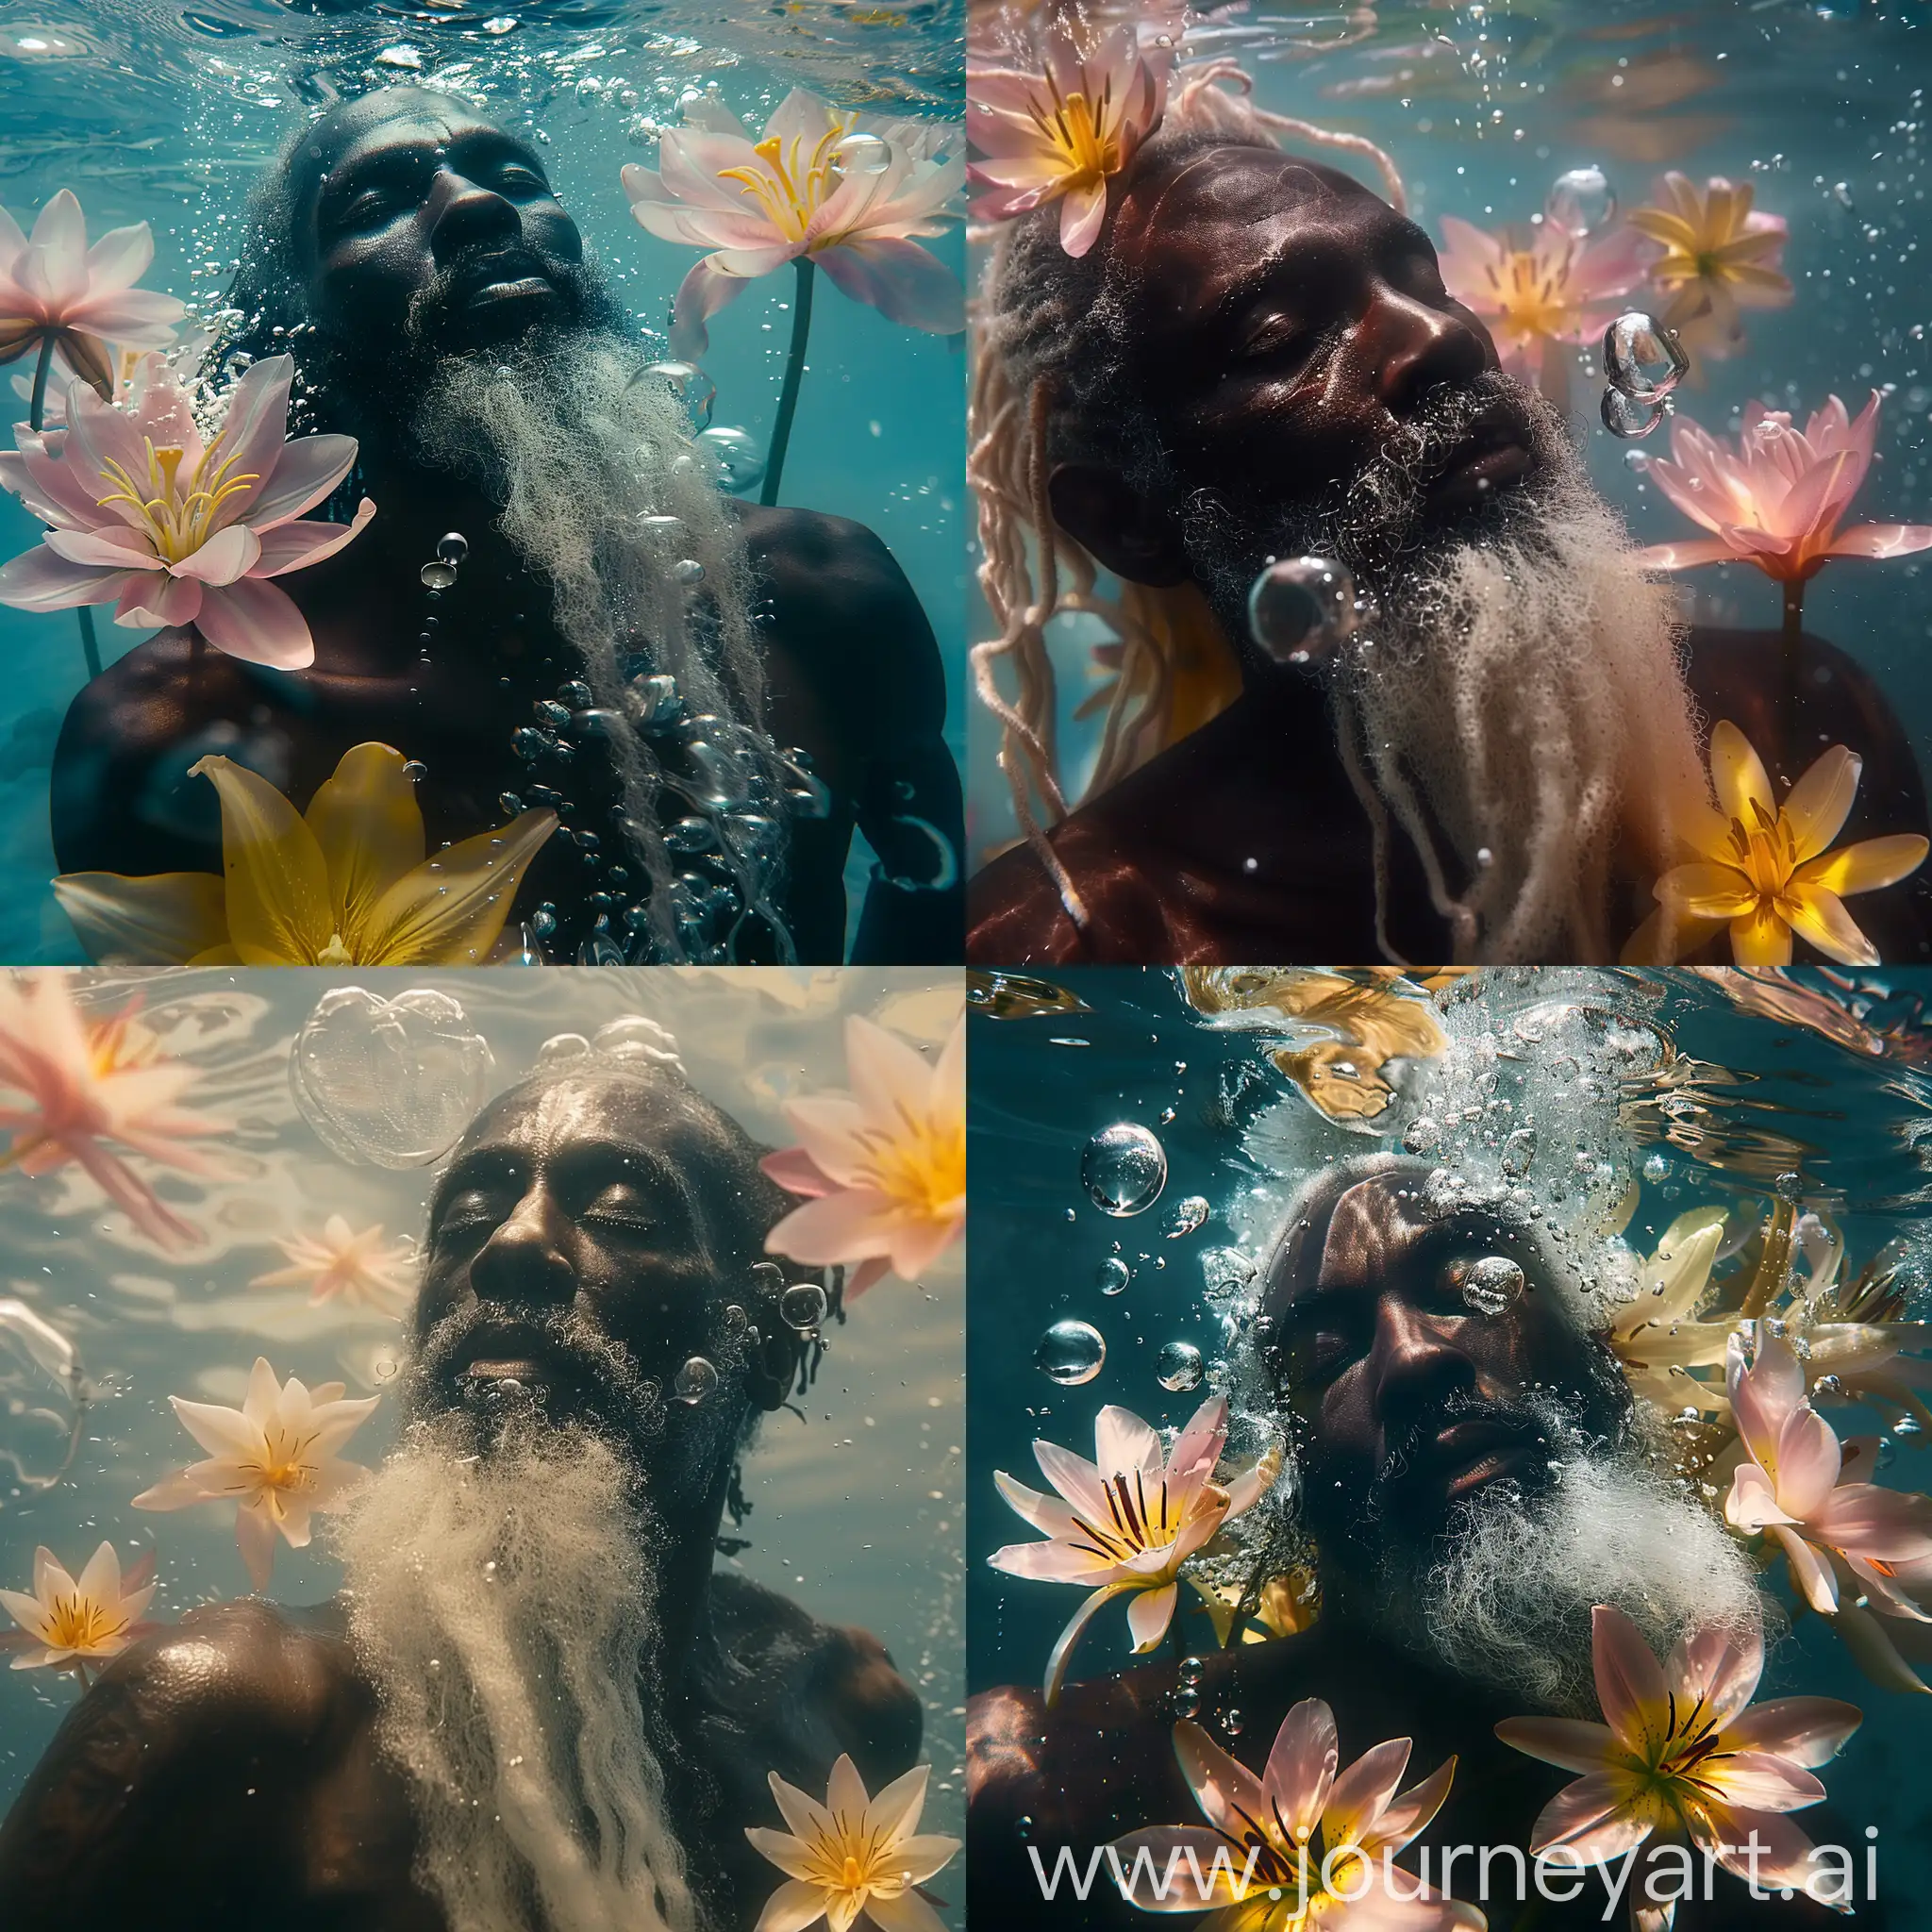 Tranquil-Underwater-Portrait-Serene-Black-Man-Amidst-SoftPink-and-Yellow-Lilies